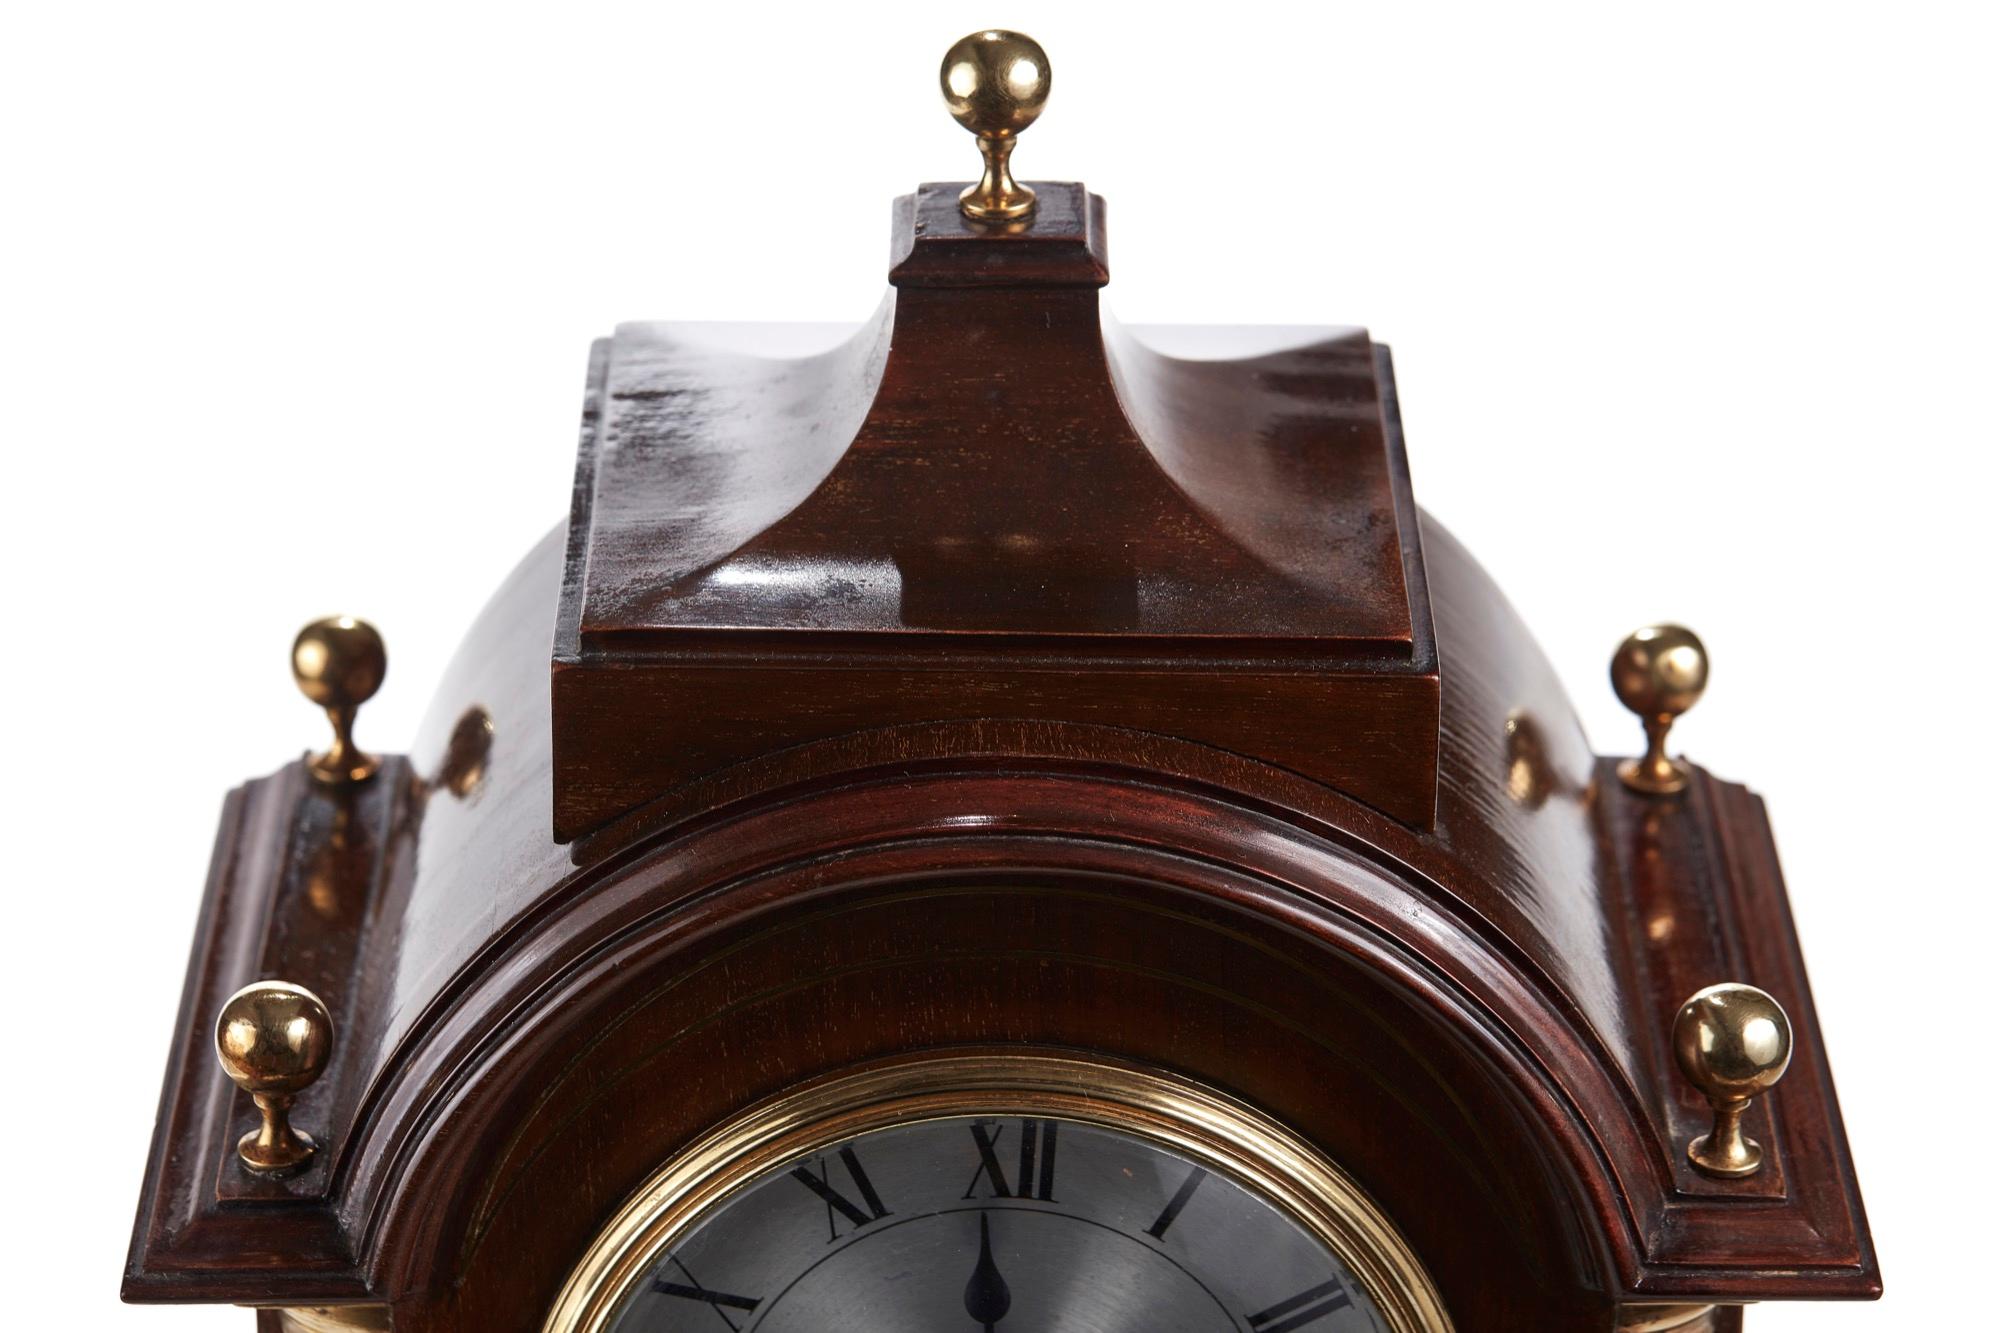 Quality antique mahogany brass inlaid 8 day mantel (fireplace) Clock having a lovely shaped top with 5 brass finals. Brass inlaid columns, round silver dial on a shaped plinth with brass feet. Perfect working order, original key.